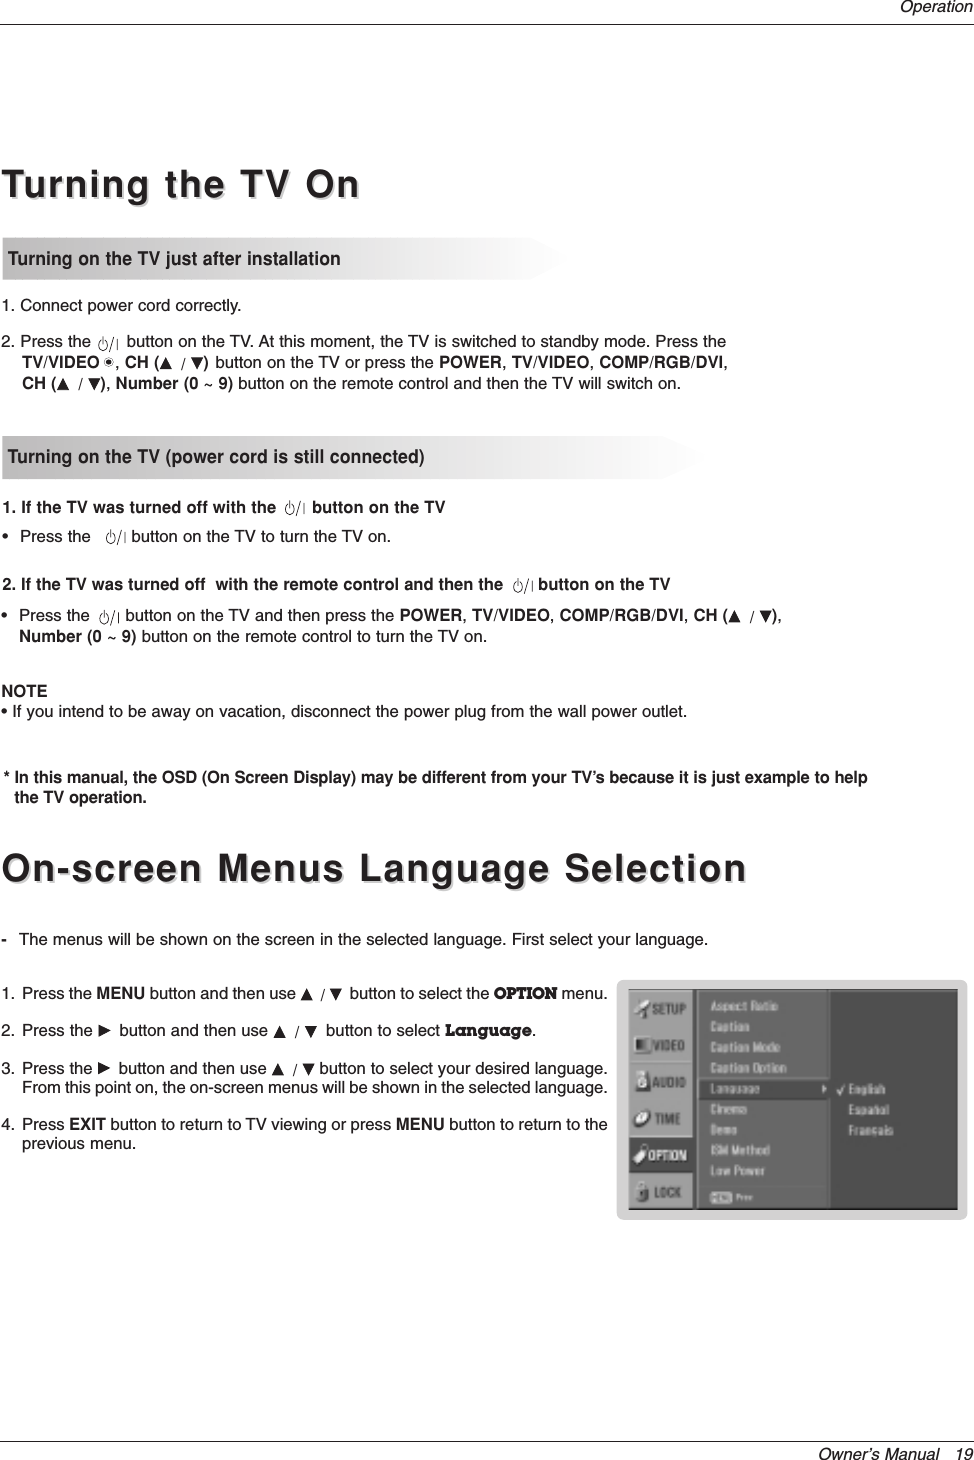 Owner’s Manual   19OperationOn-screen Menus Language SelectionOn-screen Menus Language SelectionTTurning the TV Onurning the TV OnTurning on the TV just after installationTurning on the TV (power cord is still connected)1. Connect power cord correctly.2. Press the       button on the TV. At this moment, the TV is switched to standby mode. Press theTV/VIDEO   , CH (D/ E)button on the TV or press the POWER, TV/VIDEO, COMP/RGB/DVI,CH (D/ E), Number (0 ~ 9) button on the remote control and then the TV will switch on.•Press the      button on the TV to turn the TV on.1. If the TV was turned off with the button on the TV2. If the TV was turned off  with the remote control and then the button on the TV•Press the      button on the TV and then press the POWER, TV/VIDEO, COMP/RGB/DVI, CH (D/ E),Number (0 ~ 9) button on the remote control to turn the TV on.-The menus will be shown on the screen in the selected language. First select your language.1. Press the MENU button and then use D/ Ebutton to select the OPTION menu.2. Press the Gbutton and then use D/ Ebutton to select Language. 3. Press the Gbutton and then use D/ Ebutton to select your desired language.From this point on, the on-screen menus will be shown in the selected language.4. Press EXIT button to return to TV viewing or press MENU button to return to theprevious menu.NOTE• If you intend to be away on vacation, disconnect the power plug from the wall power outlet.* In this manual, the OSD (On Screen Display) may be different from your TV’s because it is just example to helpthe TV operation.